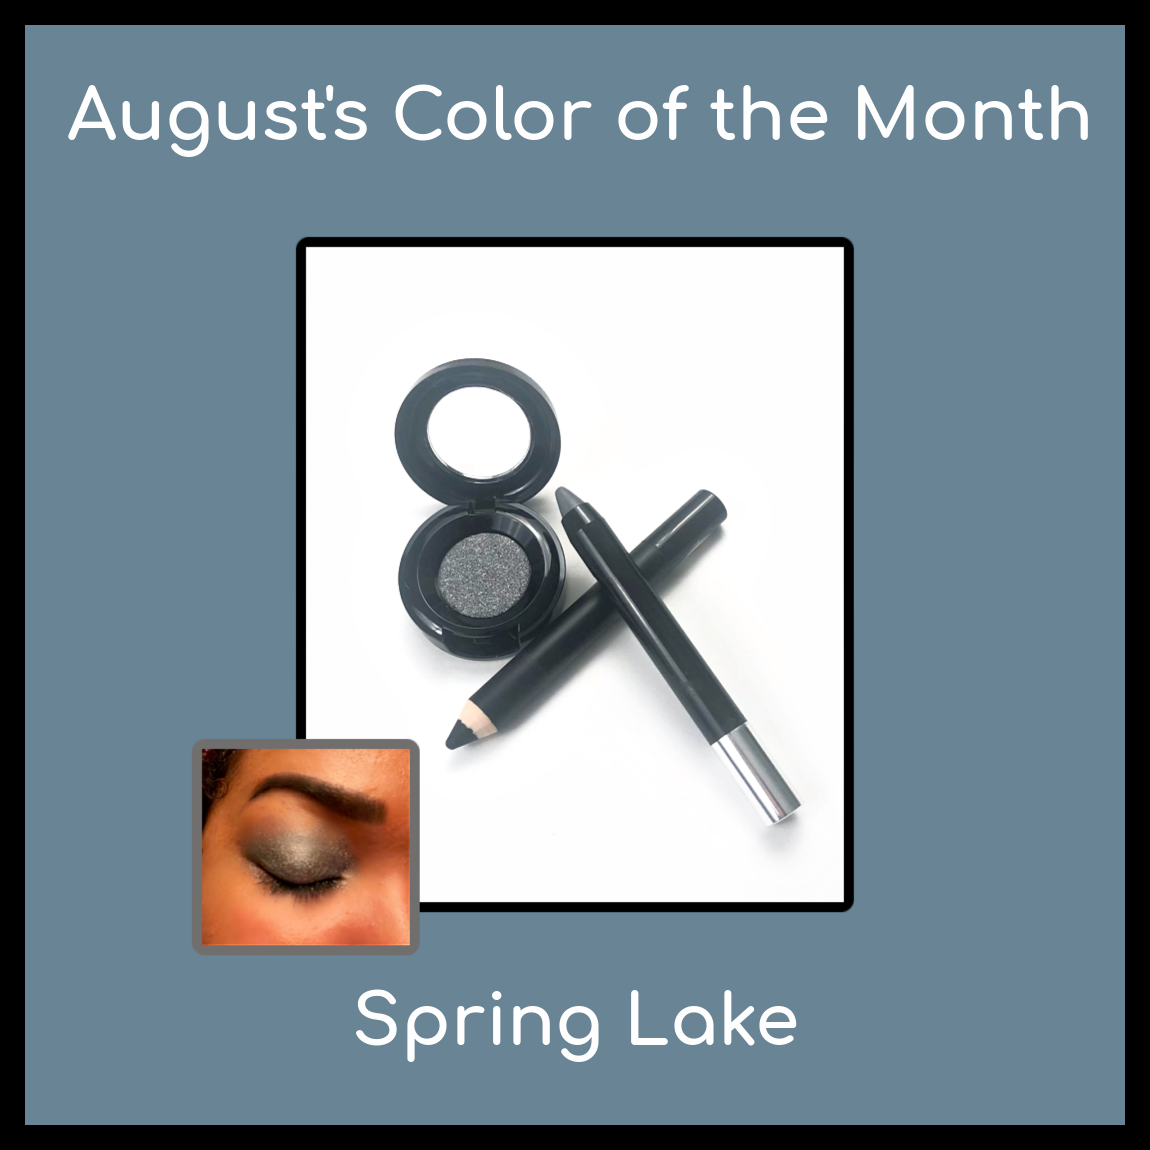 August's Color of the Month is Spring Lake